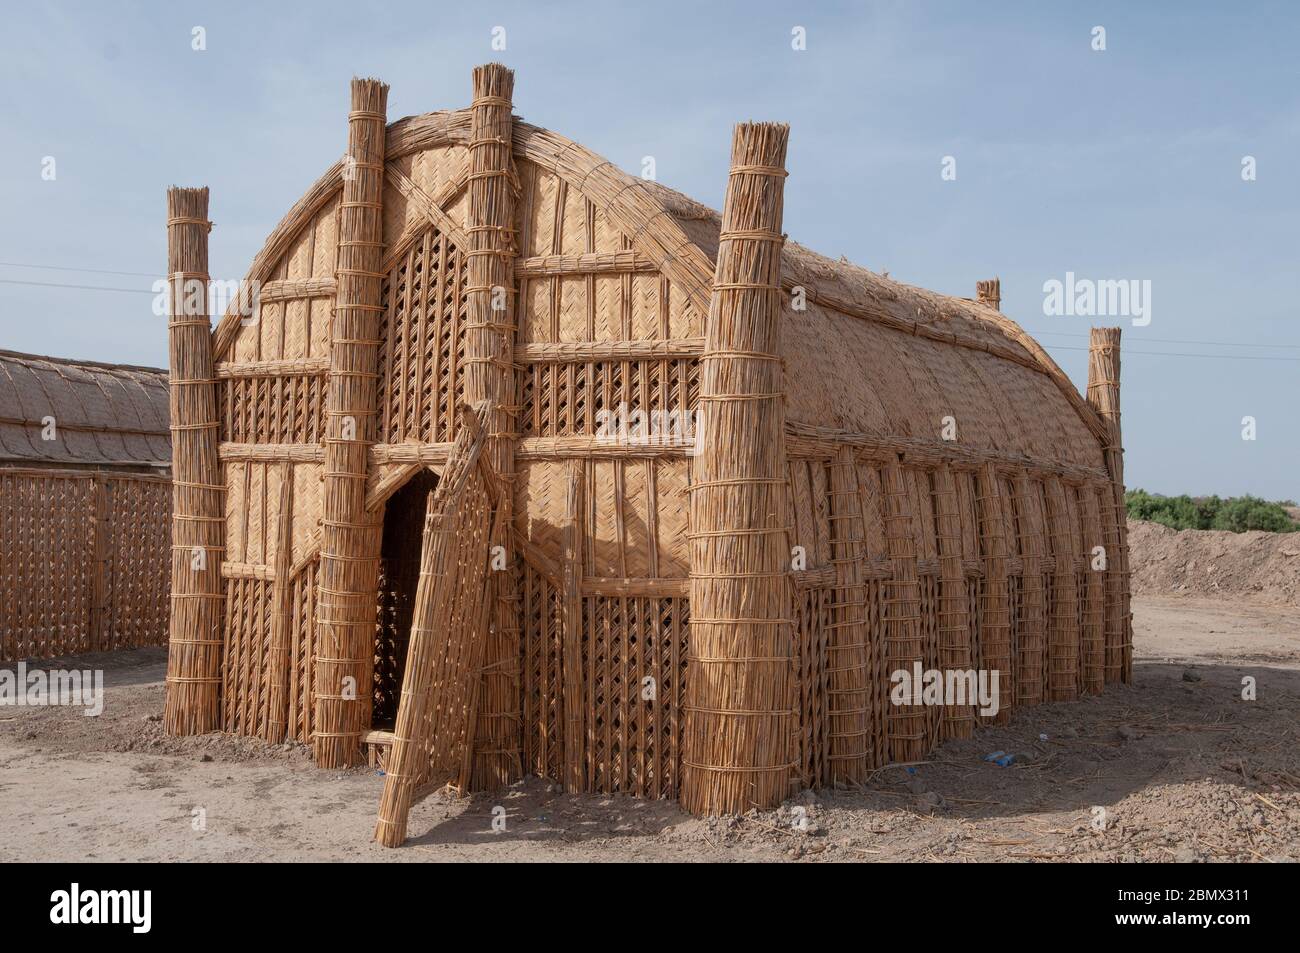 A Mudhif, traditional buildings made from dried reeds, in the marshes of Southern Iraq Stock Photo